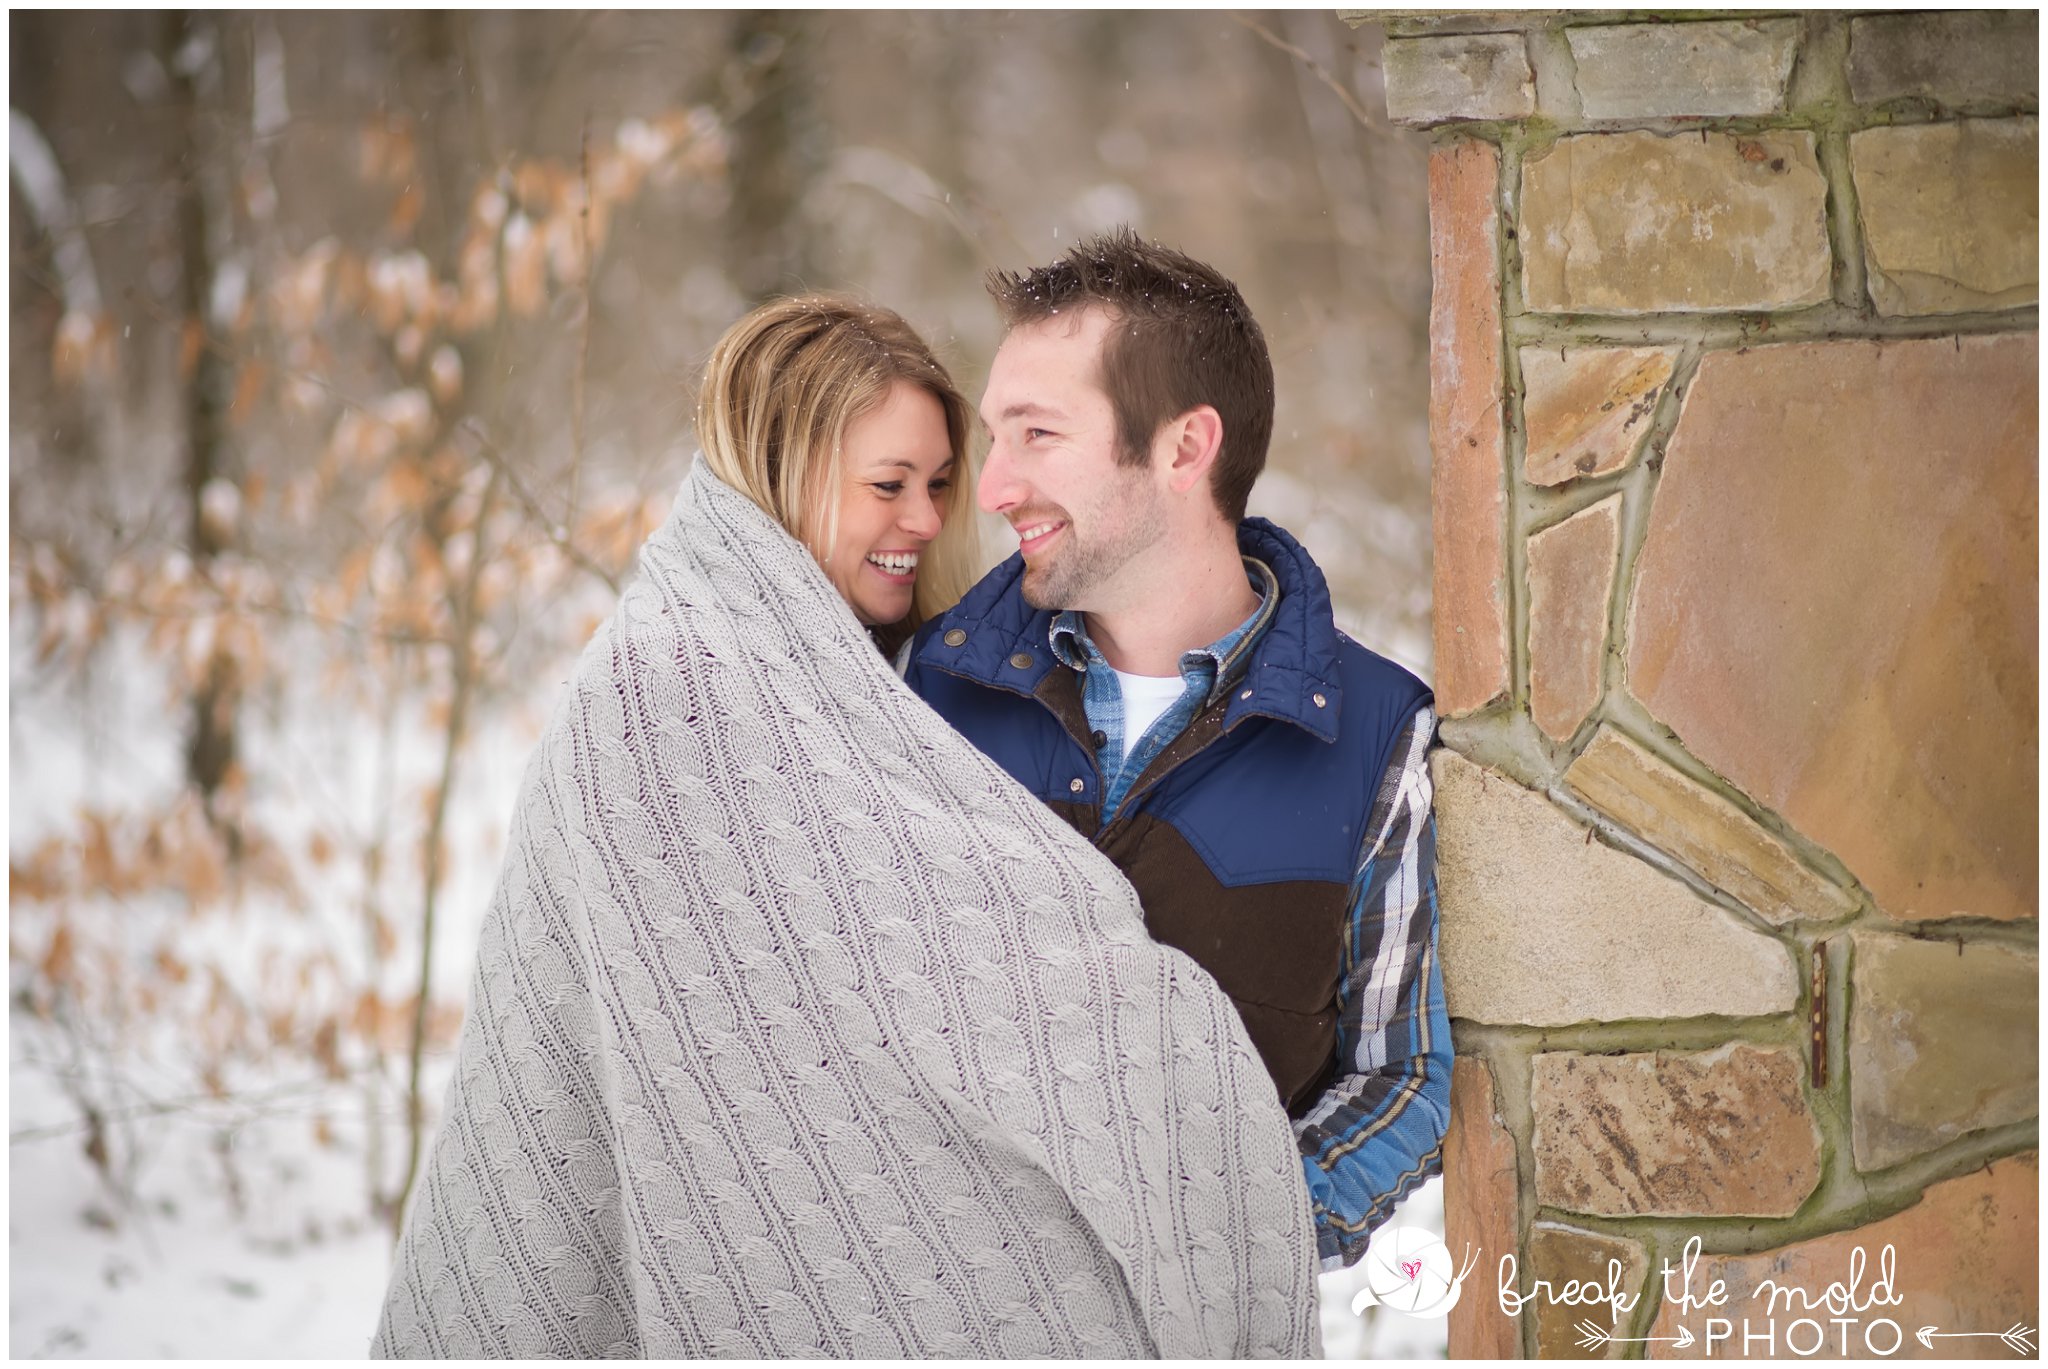 break-the-mold-photo-snowy-day-engagement-photos-knoxville-tn-tennessee-snow-day-pictures-winter-outdoor-unique-family_1506.jpg